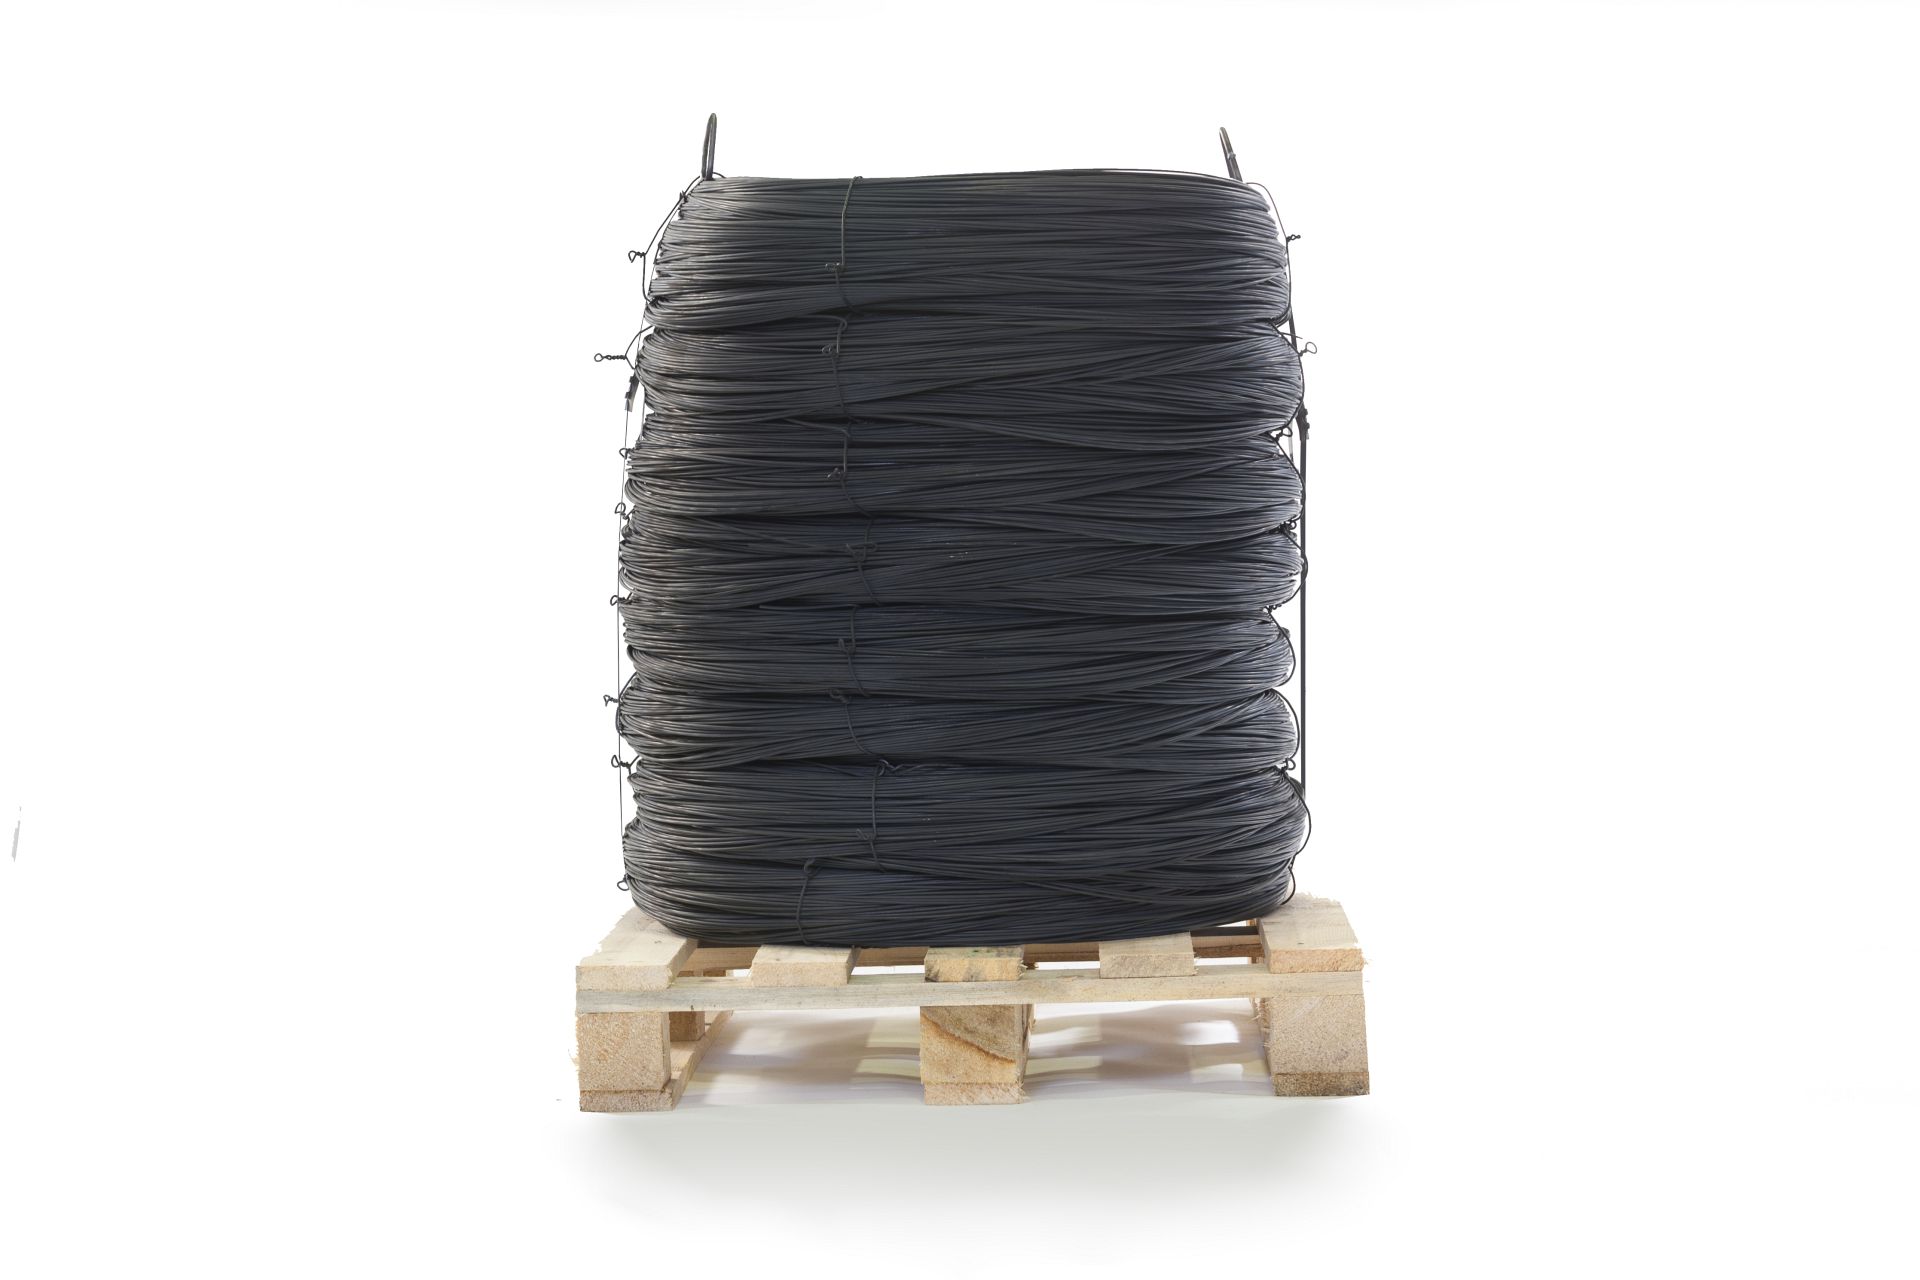 Annealed wires